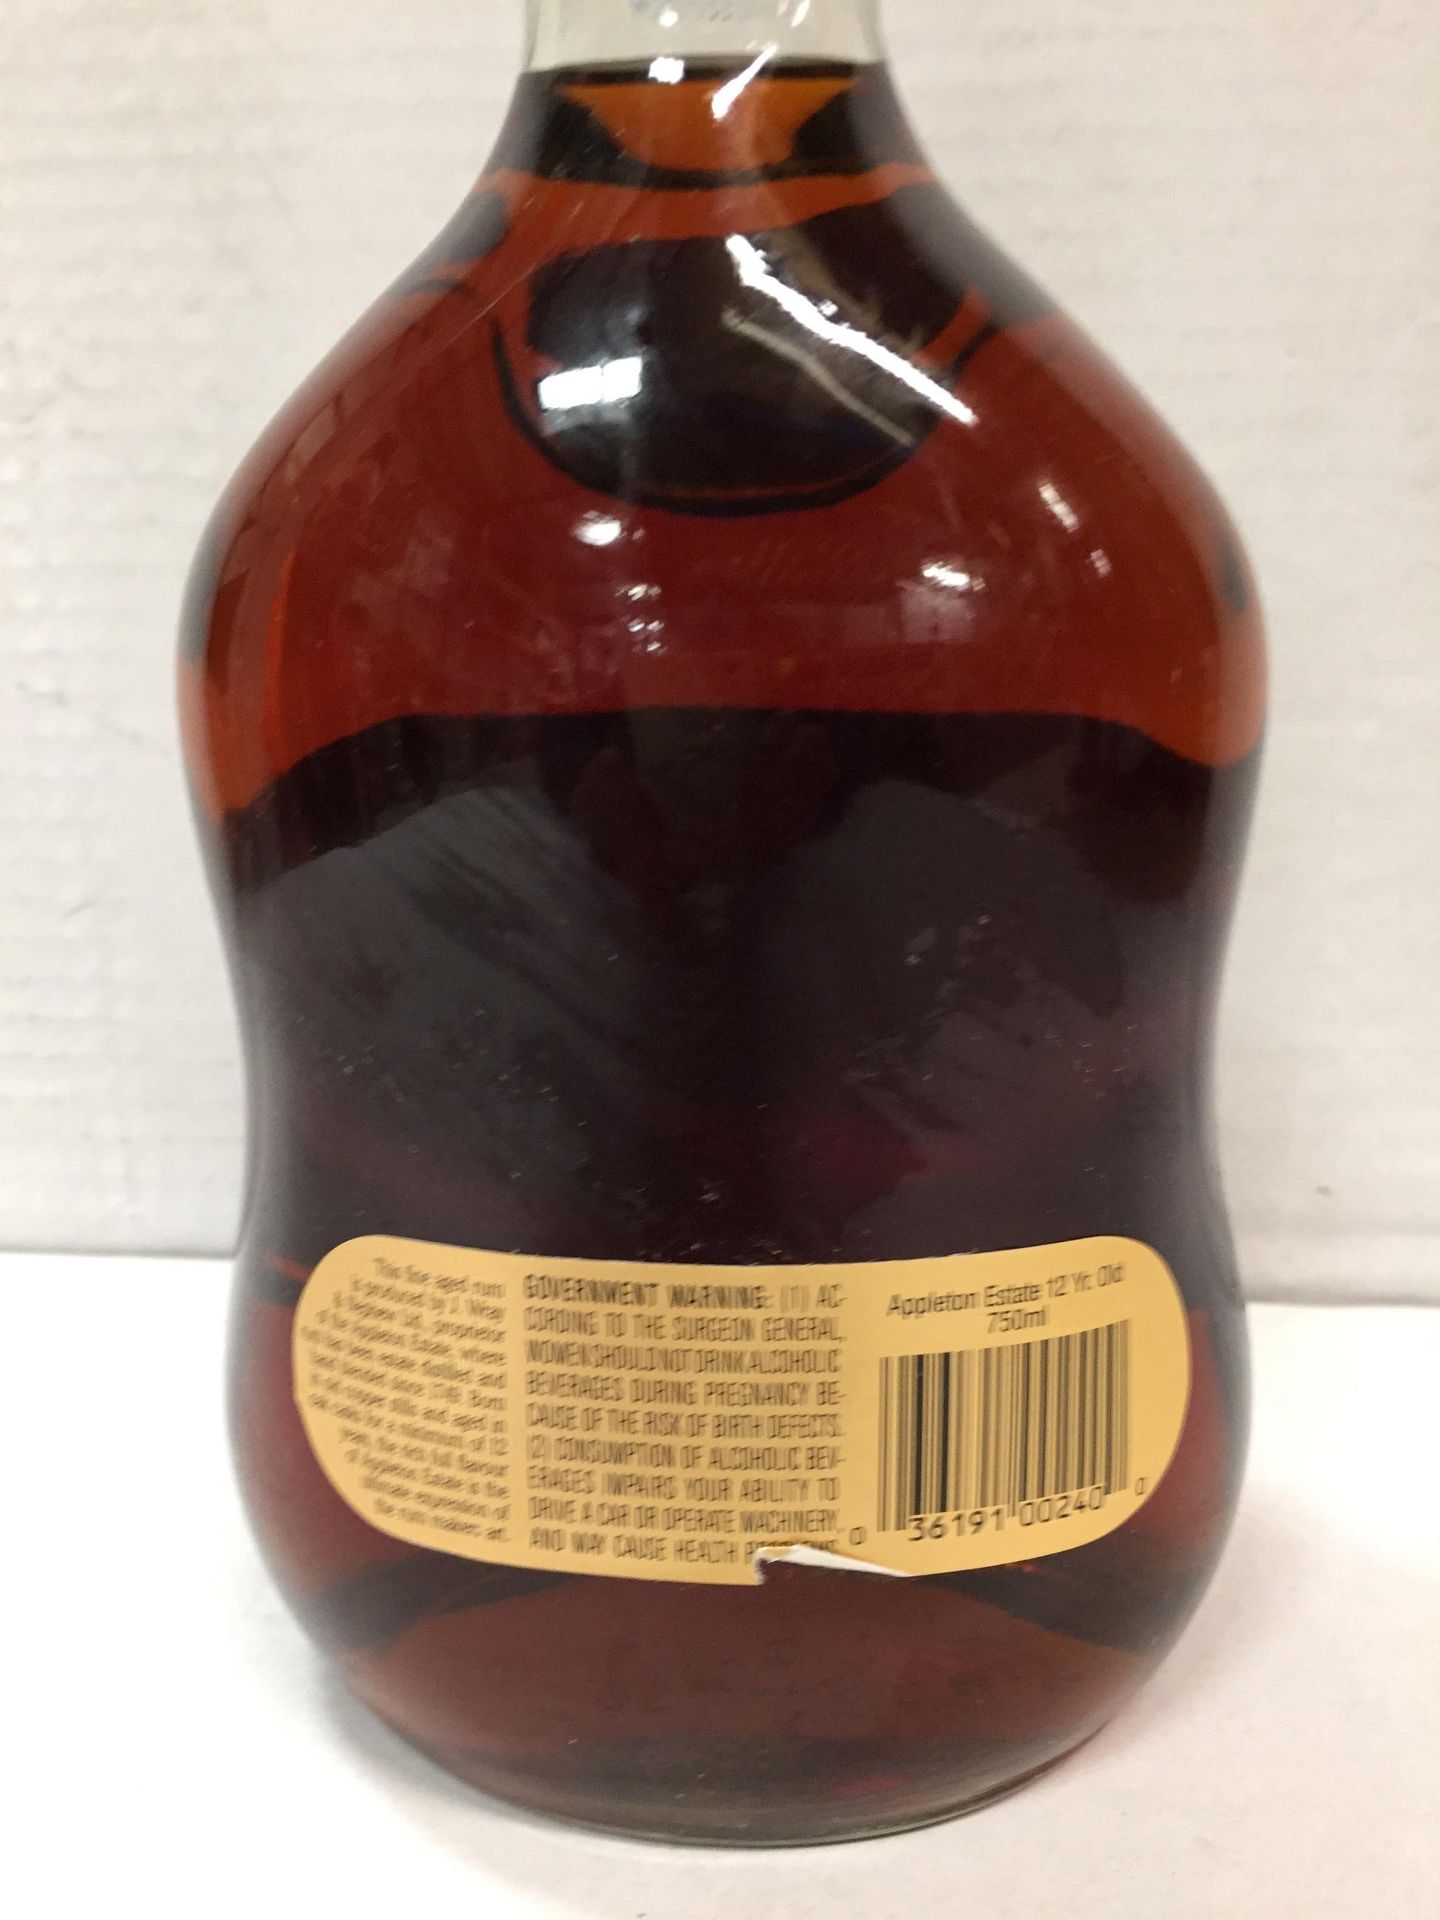 A 75cl bottle of Justerini and Brooks Directors bottle Tawny Port (20% volume) and a 750ml bottle - Image 3 of 3